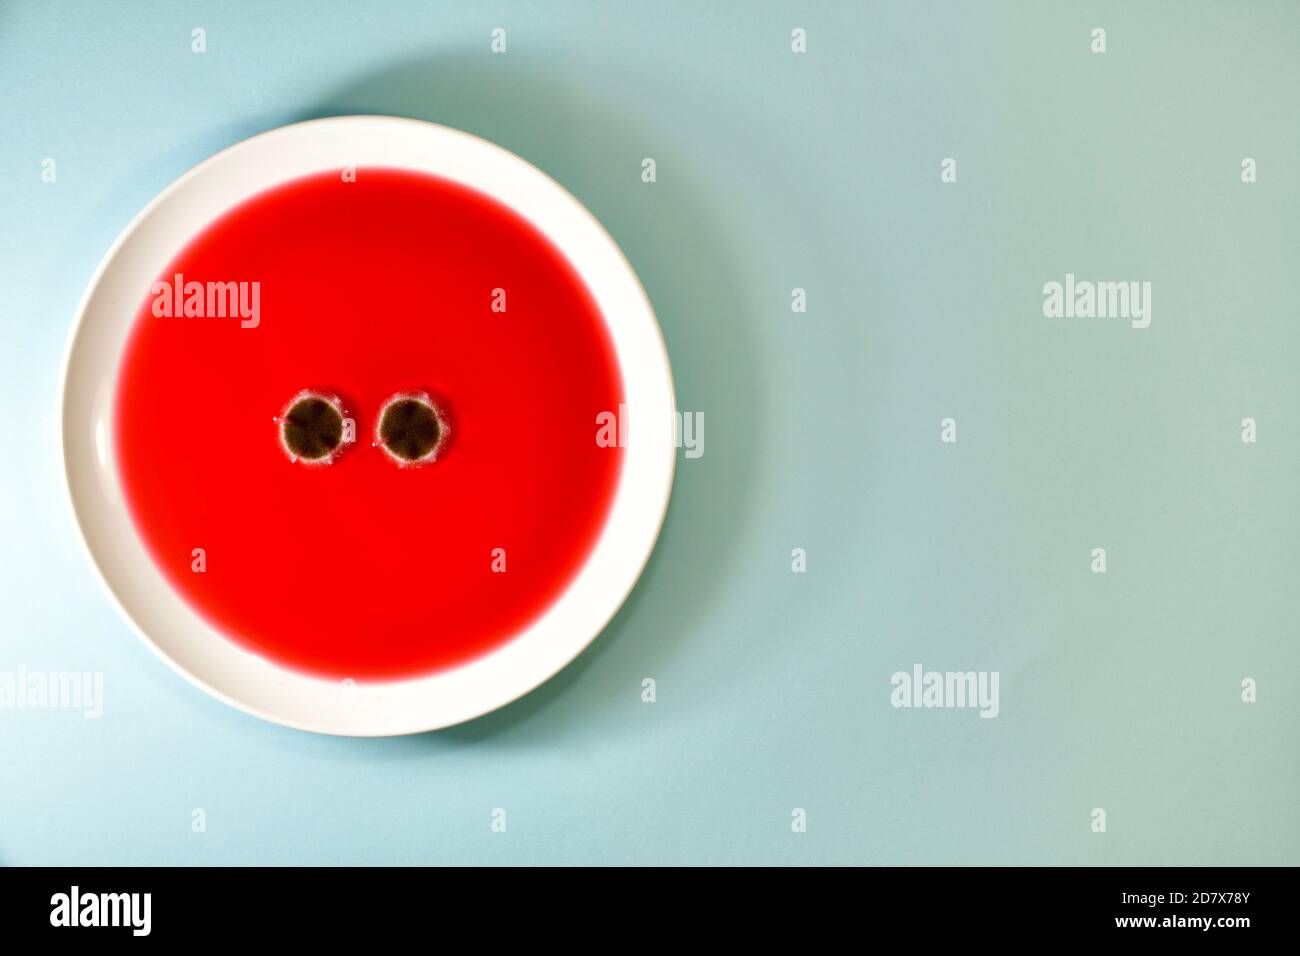 Two eyes of mould fungus, on a plate of fruit tea. Left on a mint colored background. Stock Photo